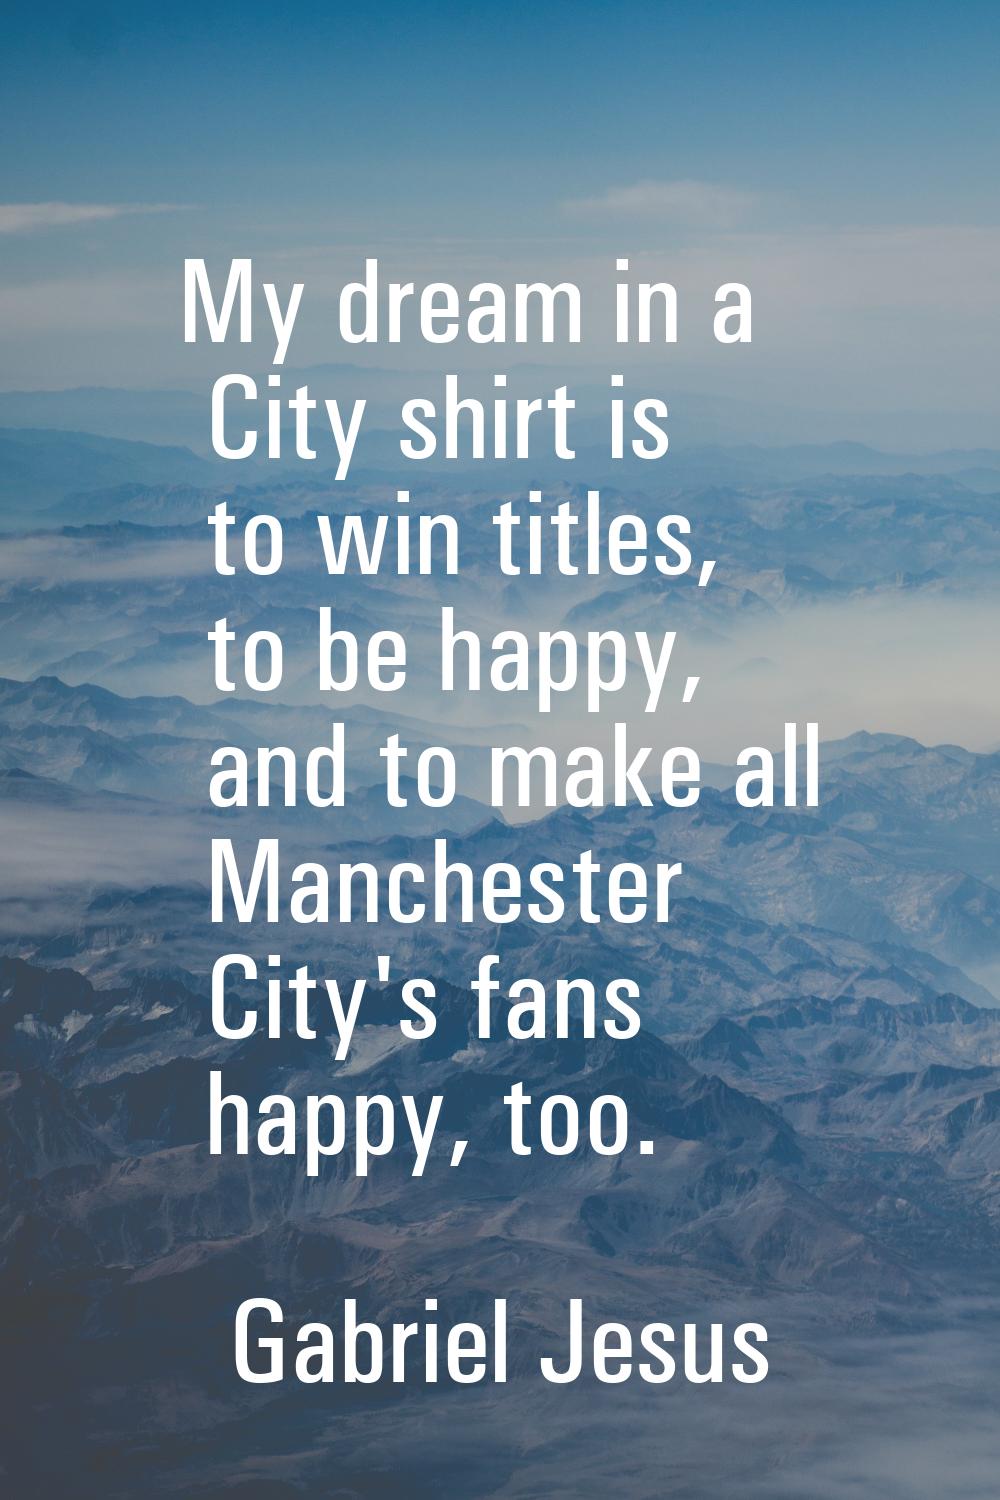 My dream in a City shirt is to win titles, to be happy, and to make all Manchester City's fans happ